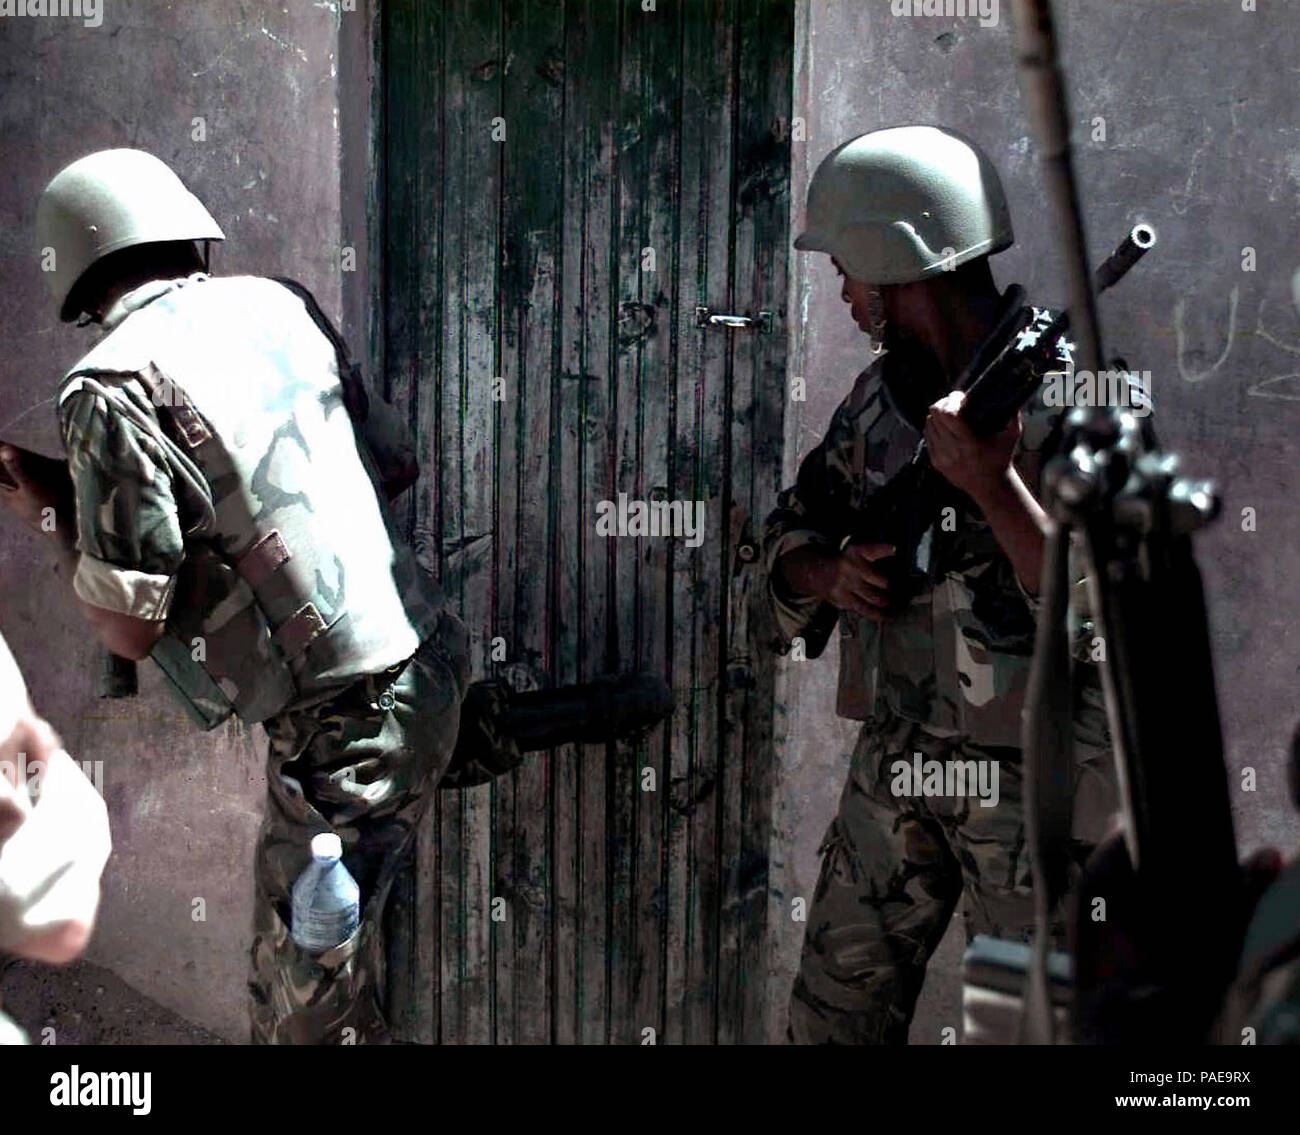 Two members of the Botswana Defense Force stand near a door to a building.  The Soldier at left kicks at the door with his right leg.  The door is part of a building in the Bakara Market in Mogadishu, Somalia.  The Soldiers are looking for weapons during a raid on the market with US Marines (not shown).  This mission is in direct support of Operation Restore Hope. Stock Photo